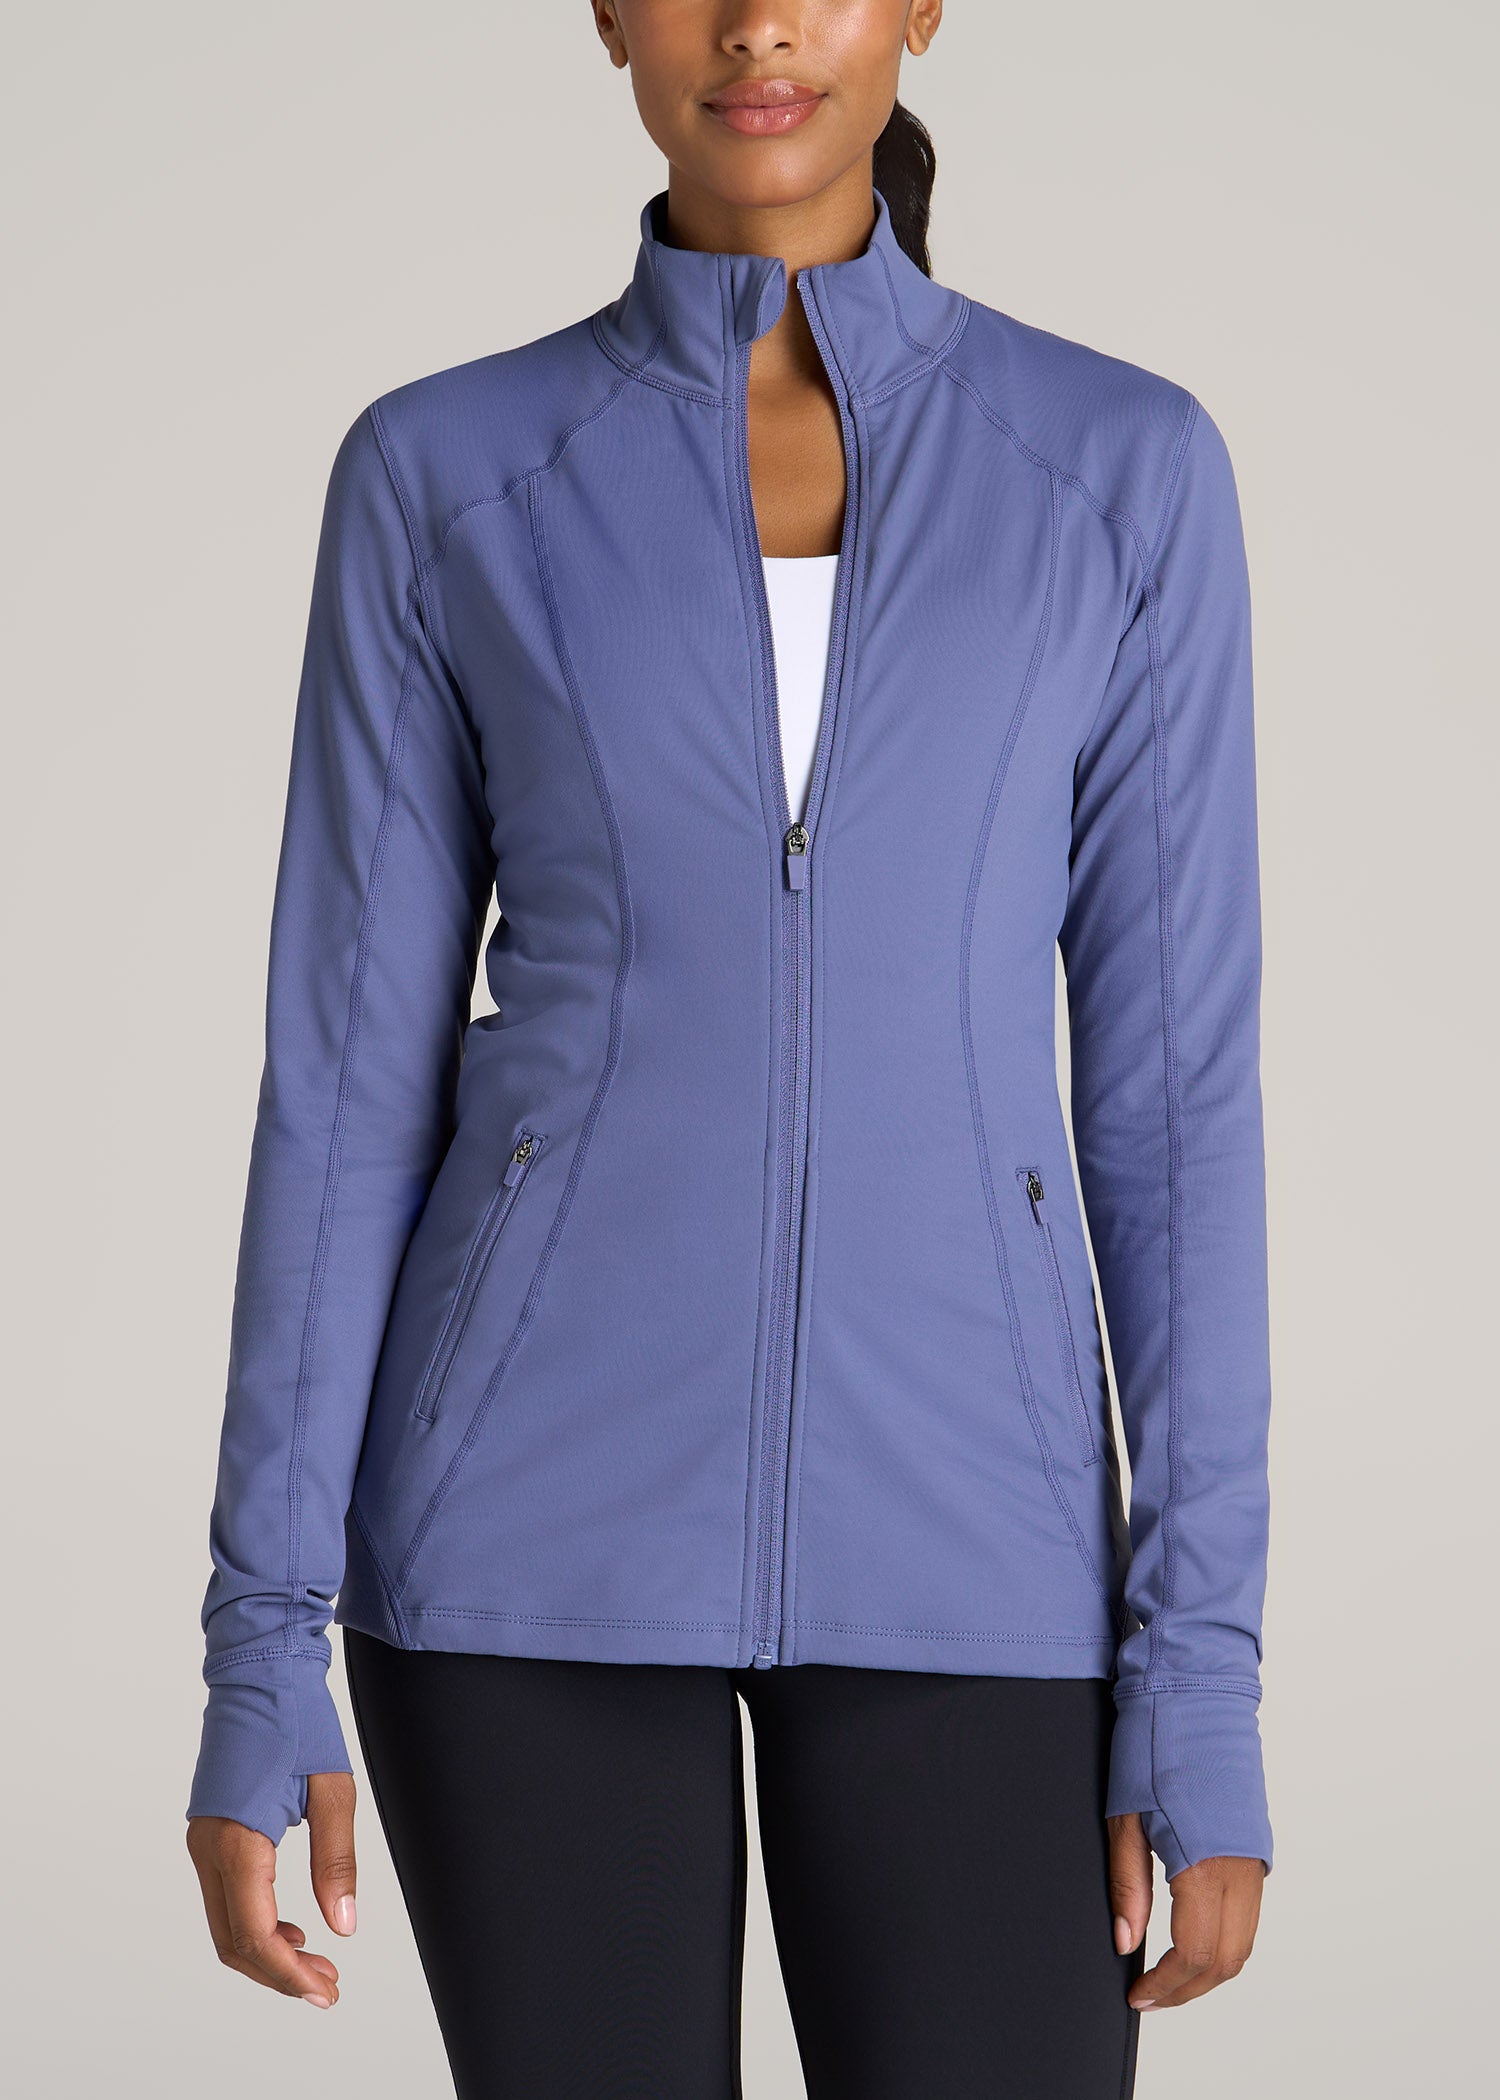 Warm-Up Athletic Tall Women's Jacket